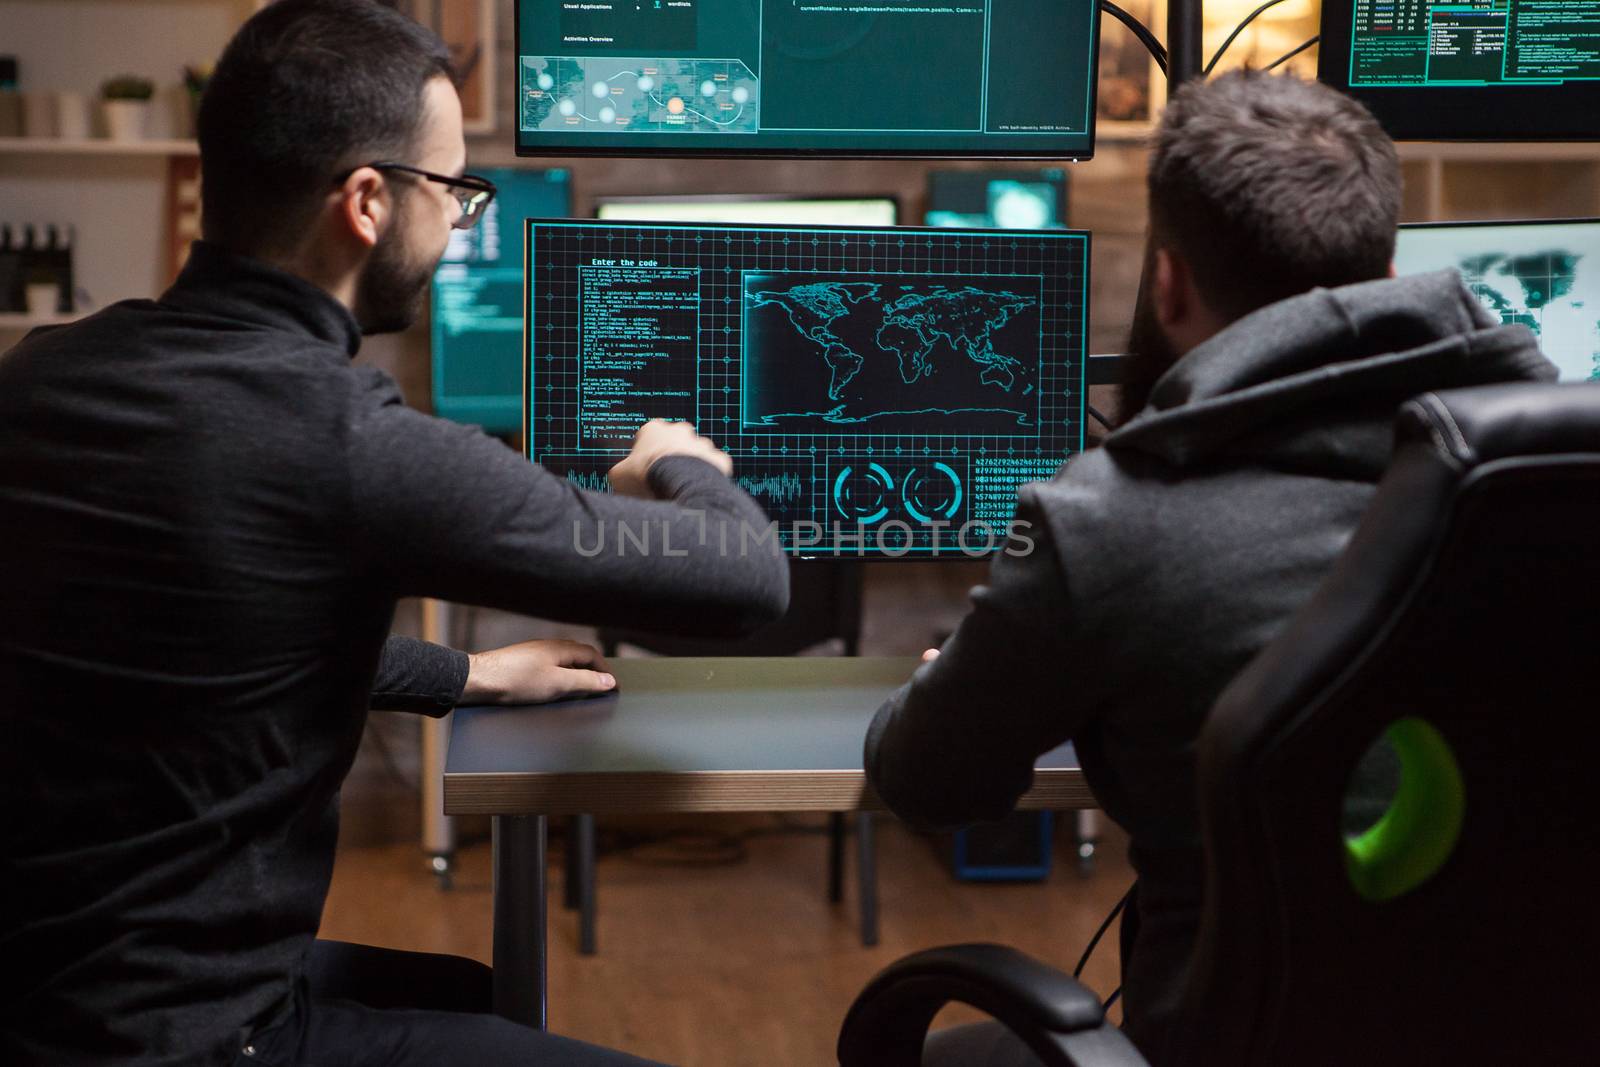 Team of hackers planning a cyber attack using a dangerous malware.